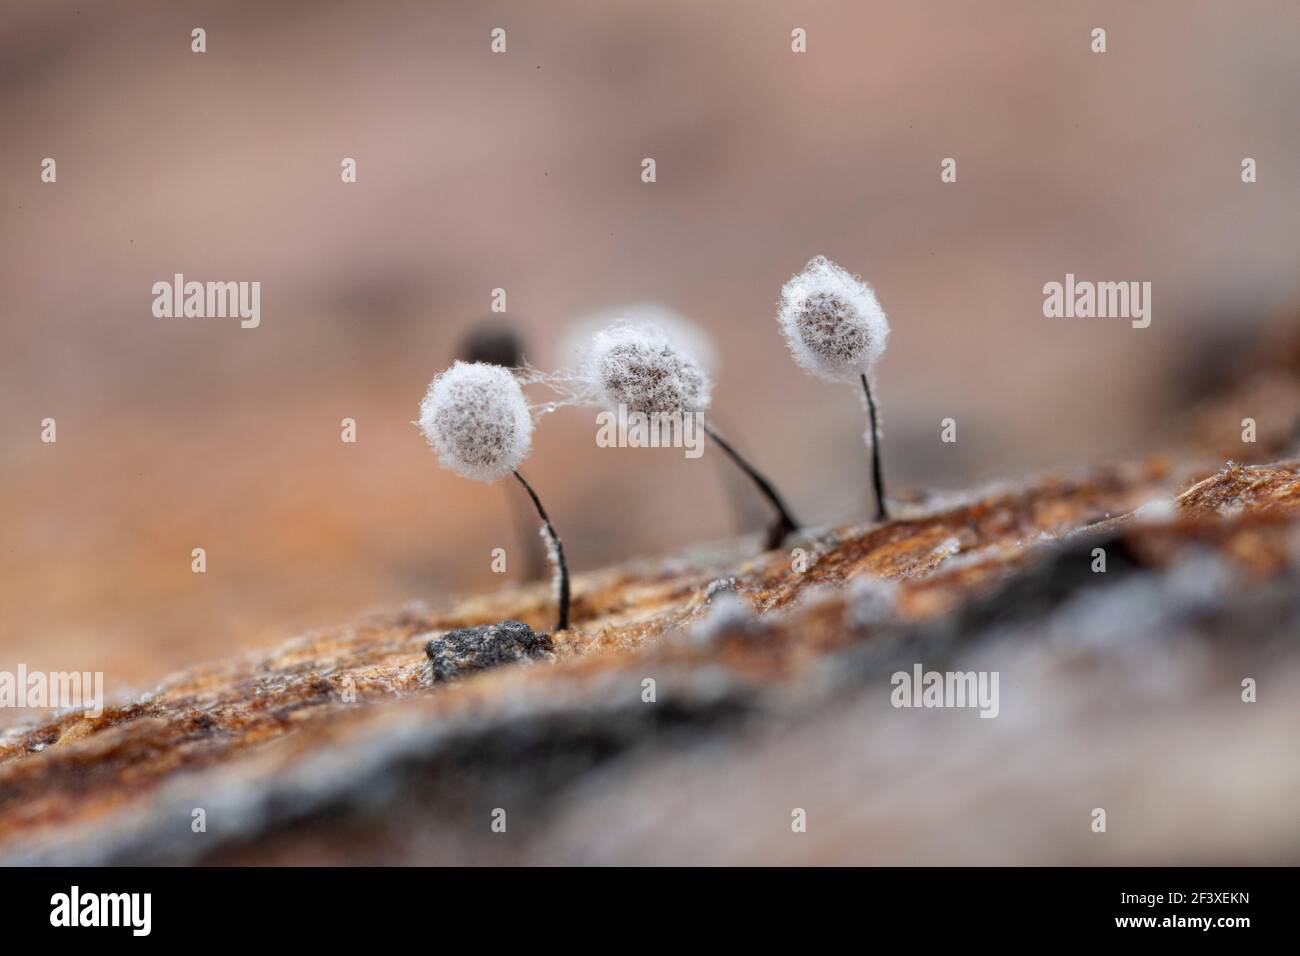 Slime mold on decaying wood in autumn Stock Photo